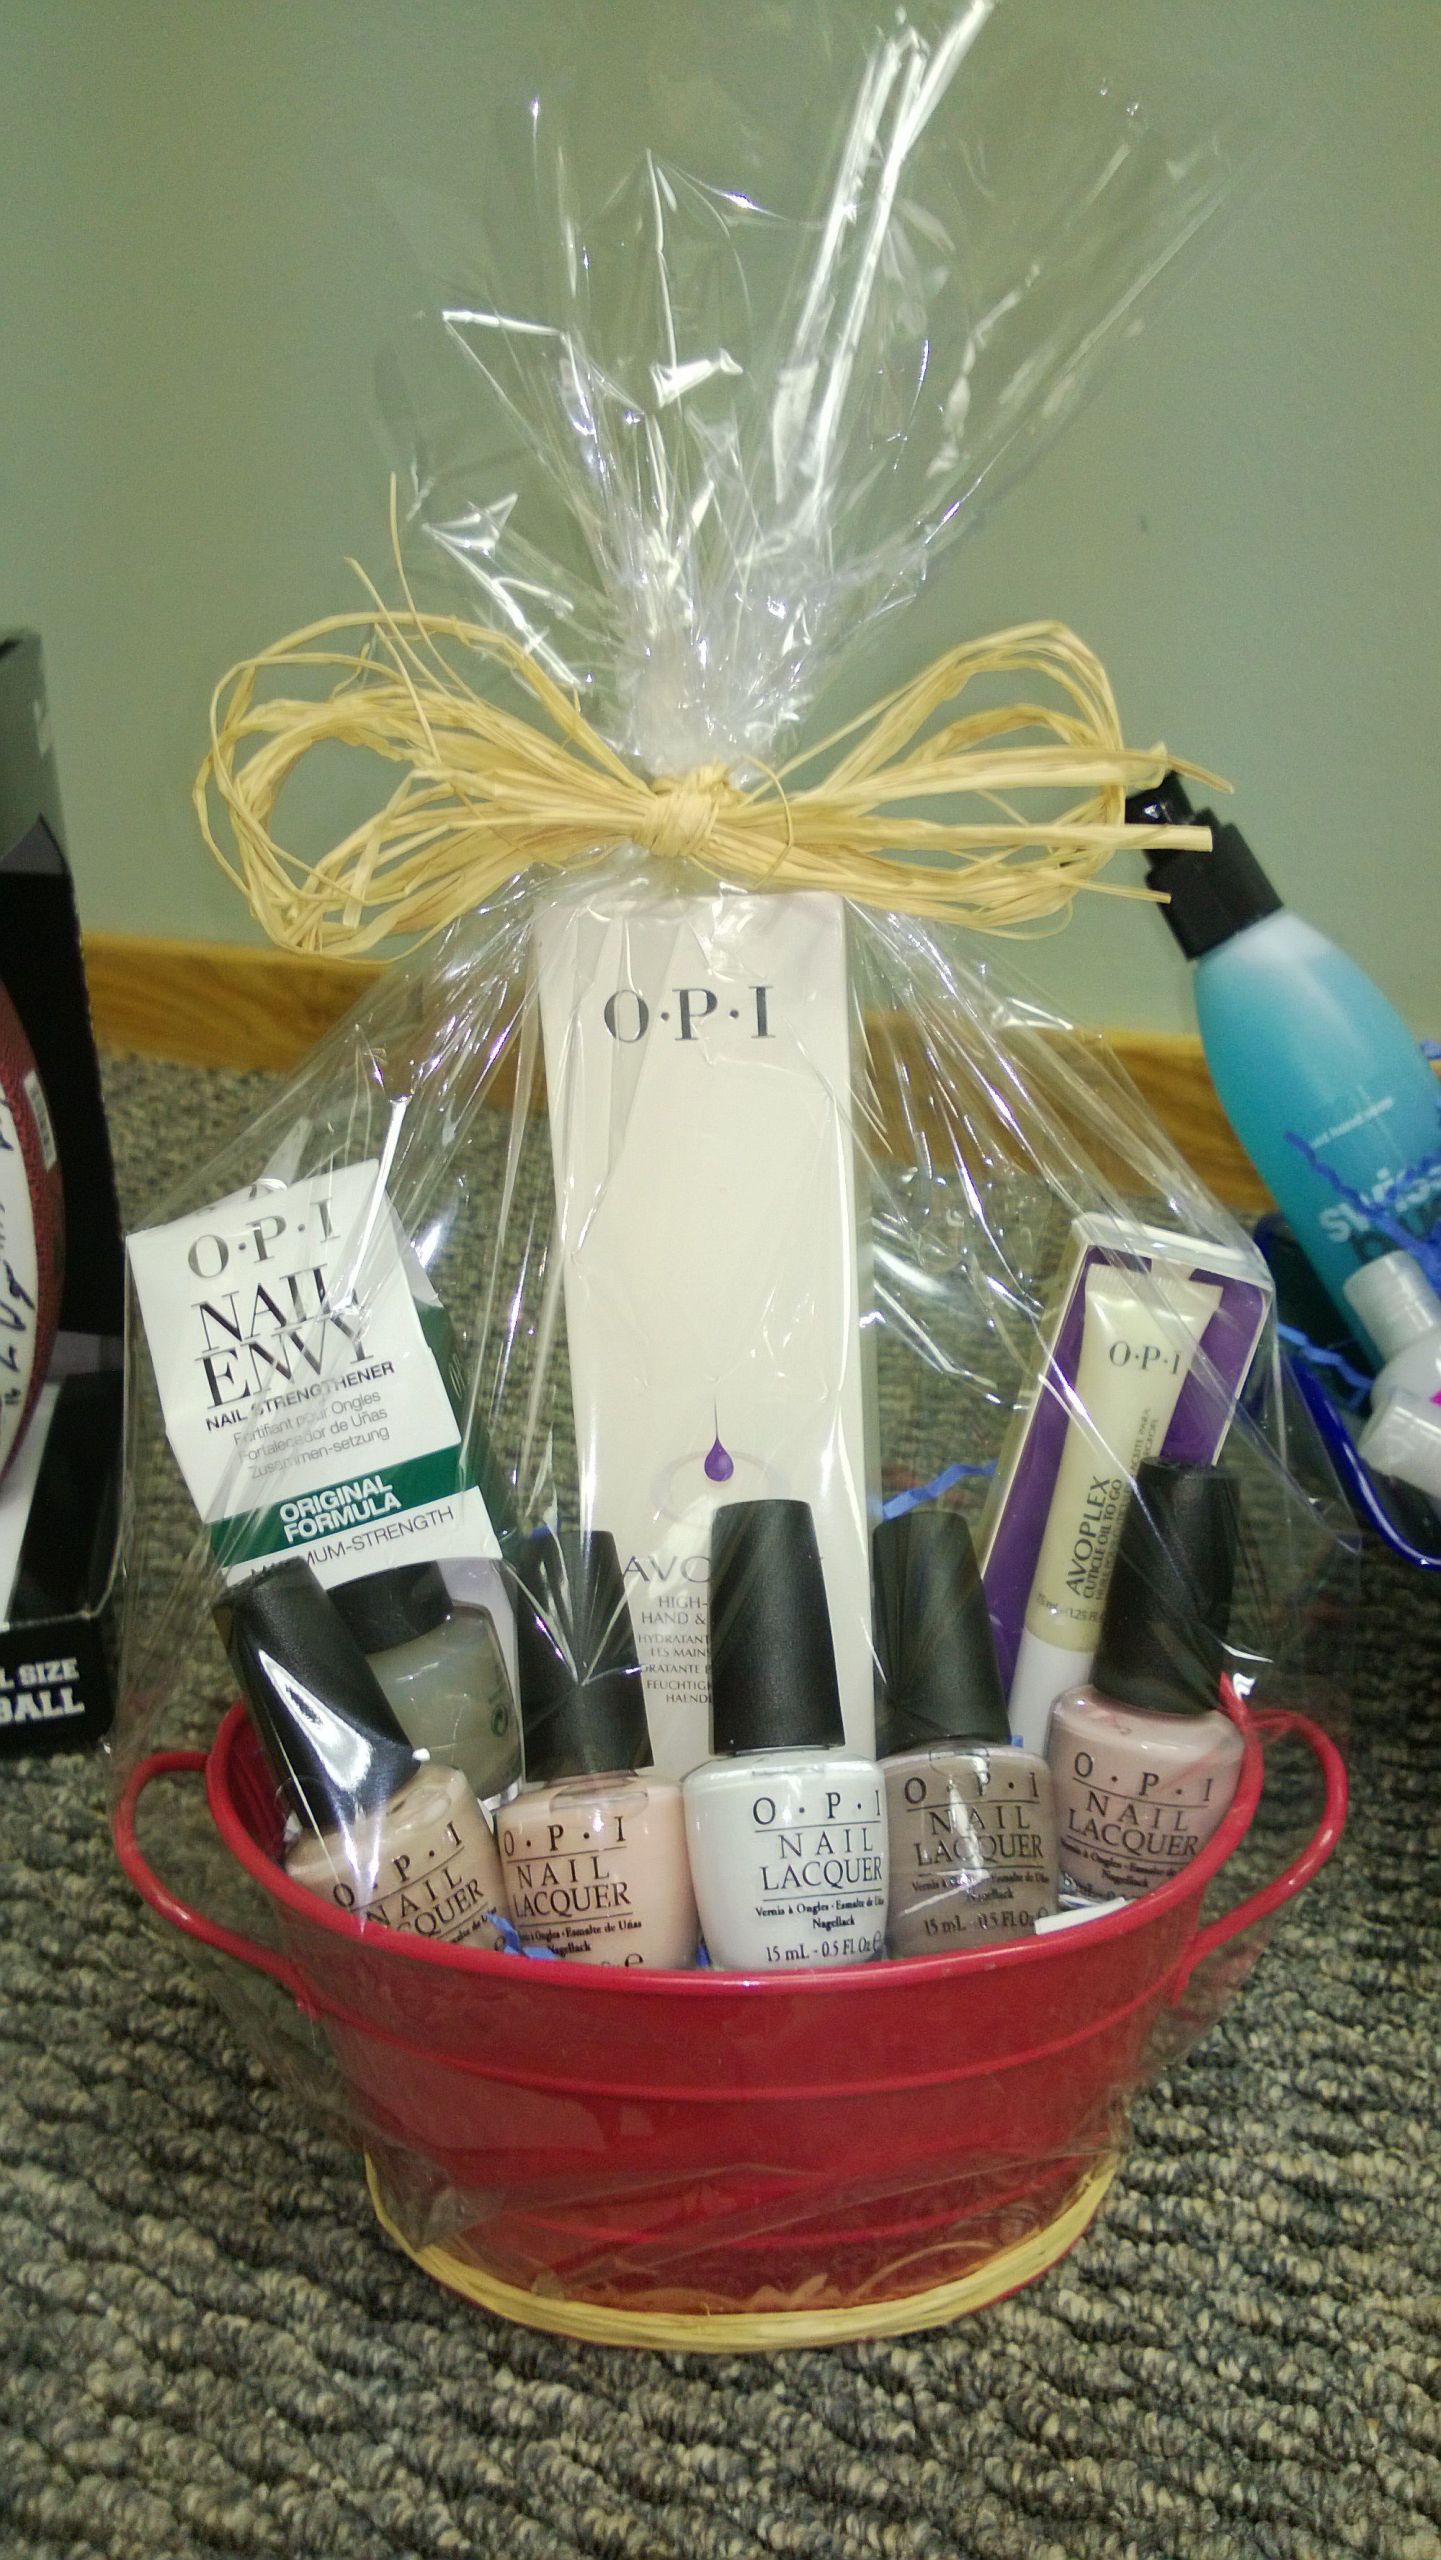 Gift Basket Ideas For Silent Auction
 Silent Auction OPI generously donated hundreds in